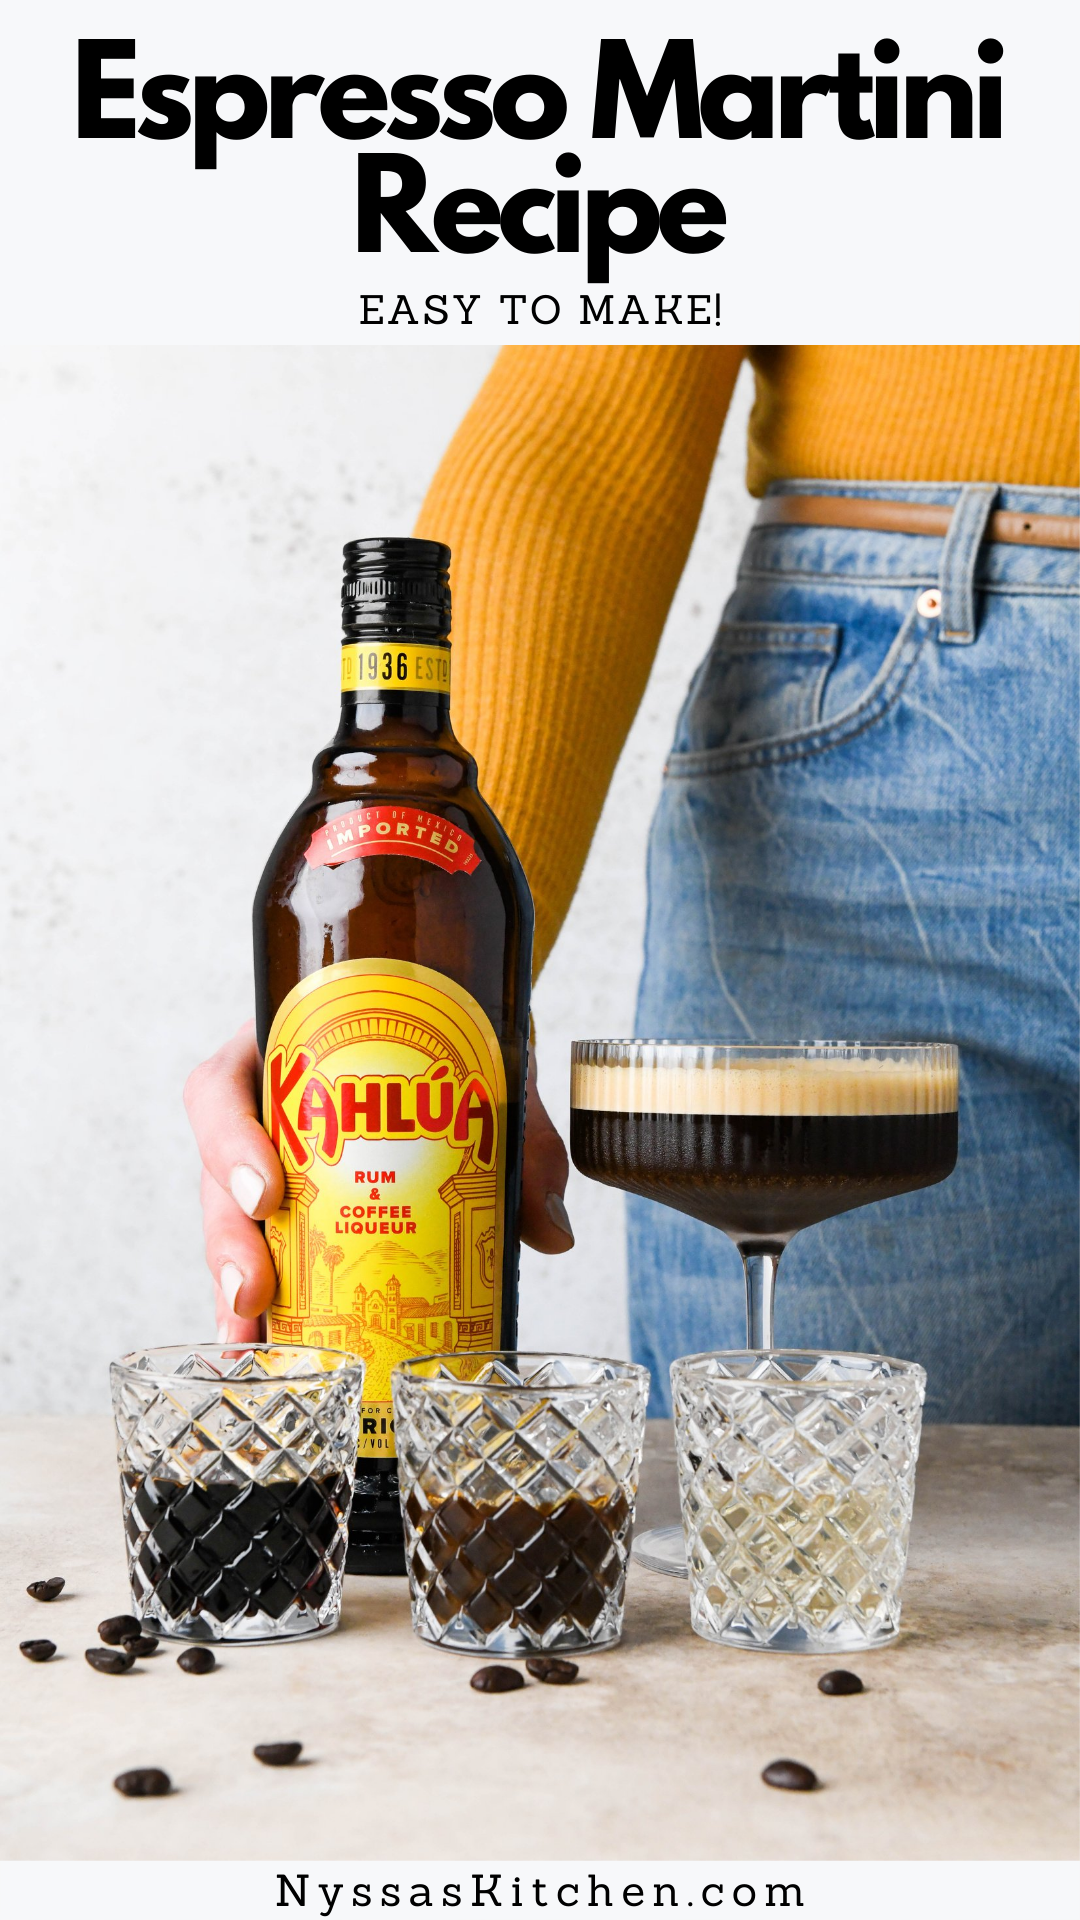 Let’s talk about how to make an espresso martini with both kahlua and vodka at home. This easy 5-minute espresso martini recipe is a bold and sweet cocktail with a foamy top that is a total crowd pleaser! It's the perfect after dinner drink made with a few simple ingredients (prepared instant coffee works well or hot espresso) and garnished with coffee beans. Creamy, extra easy, and totally dairy free!